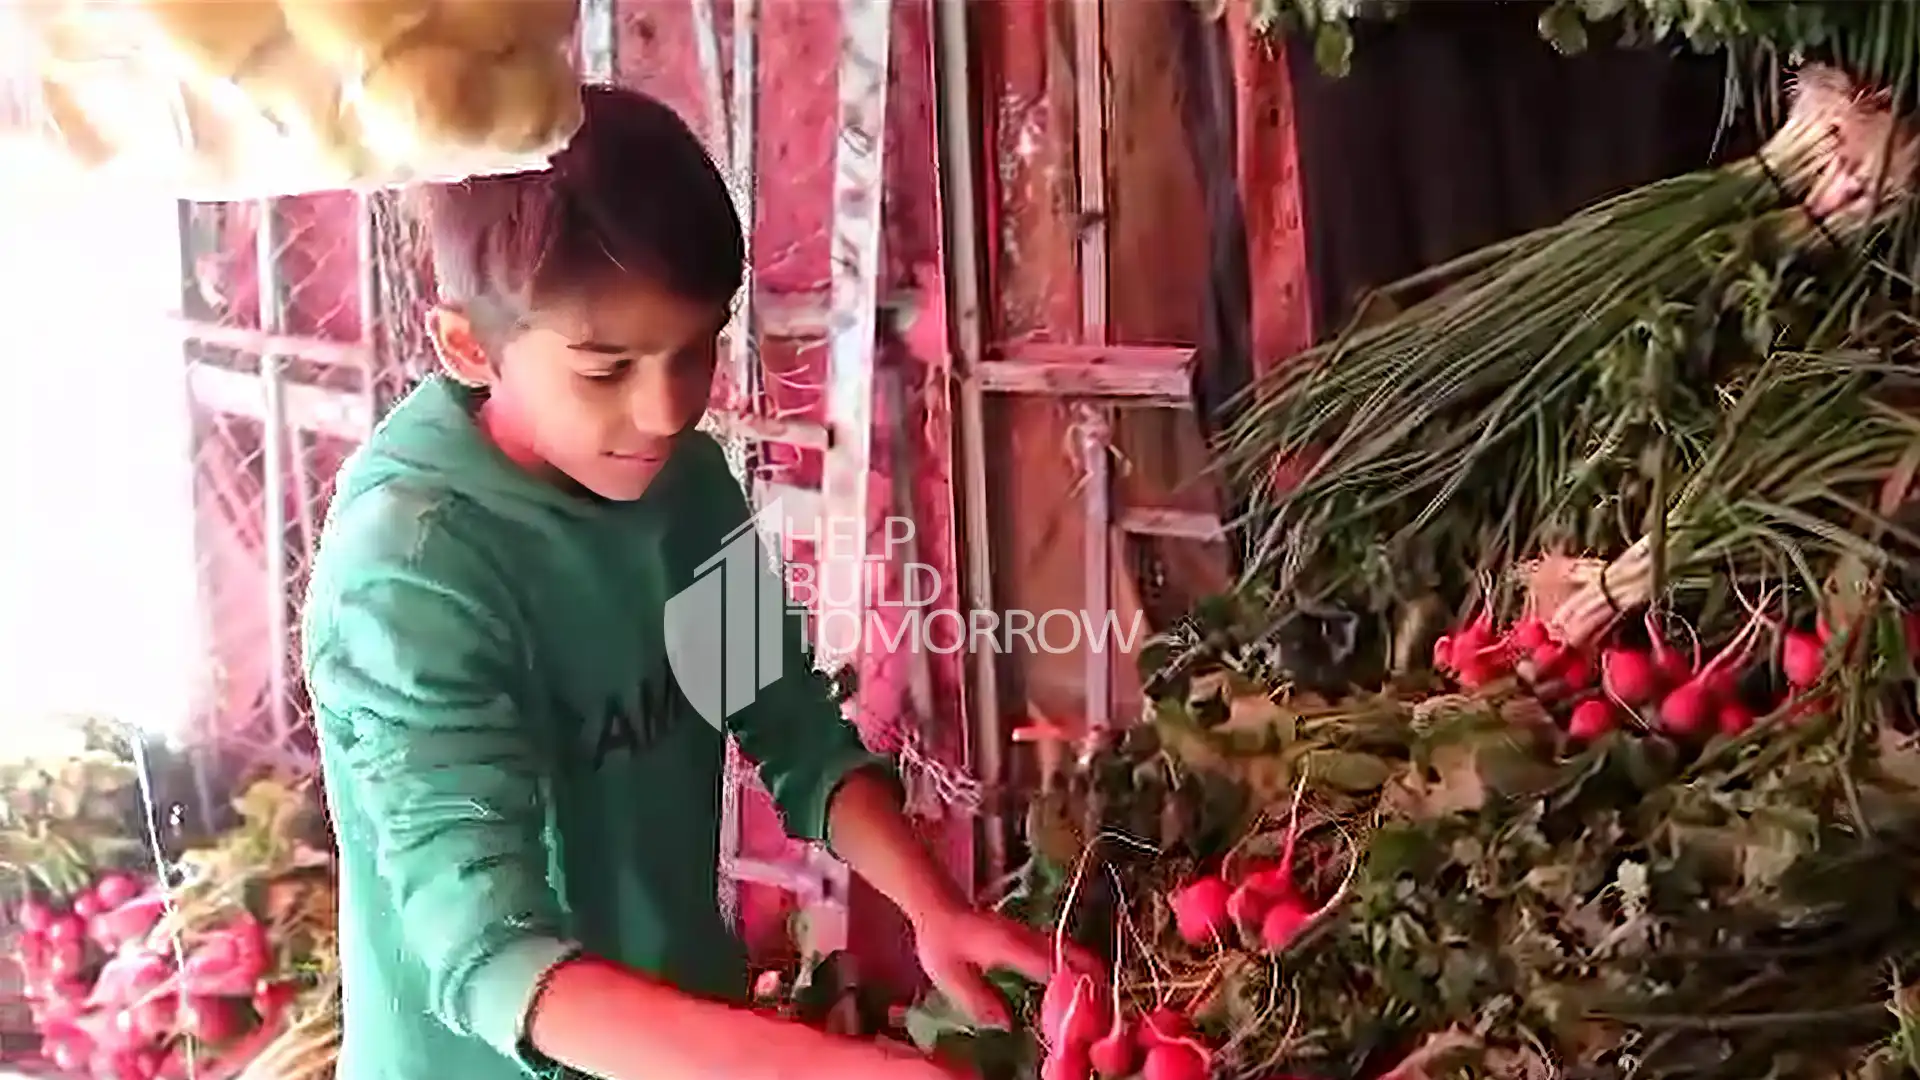 Basit working in a green grocery due to poverty